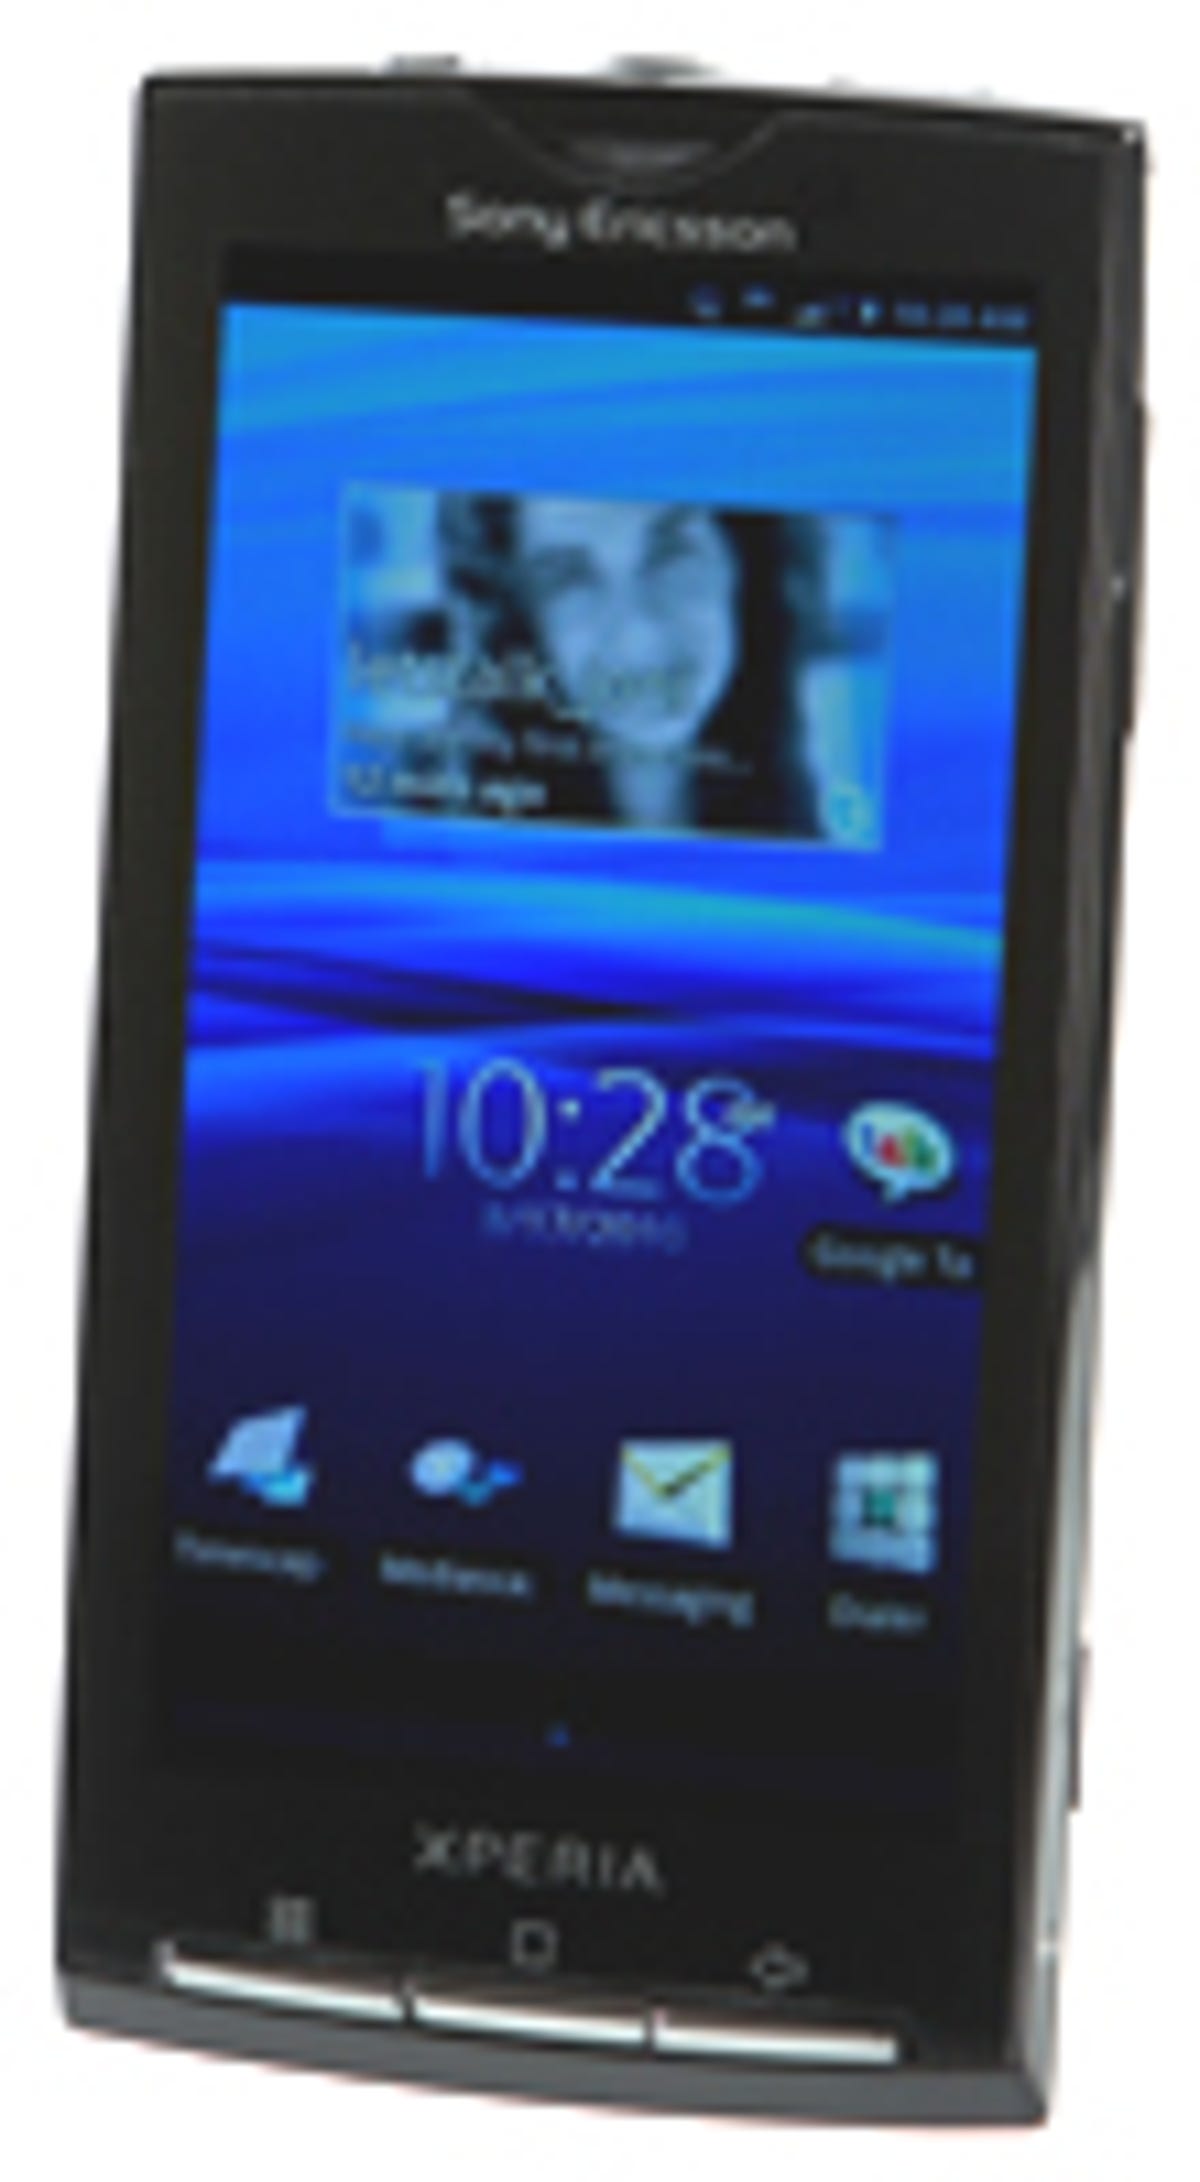 The Xperia X10 from Sony Ericsson.